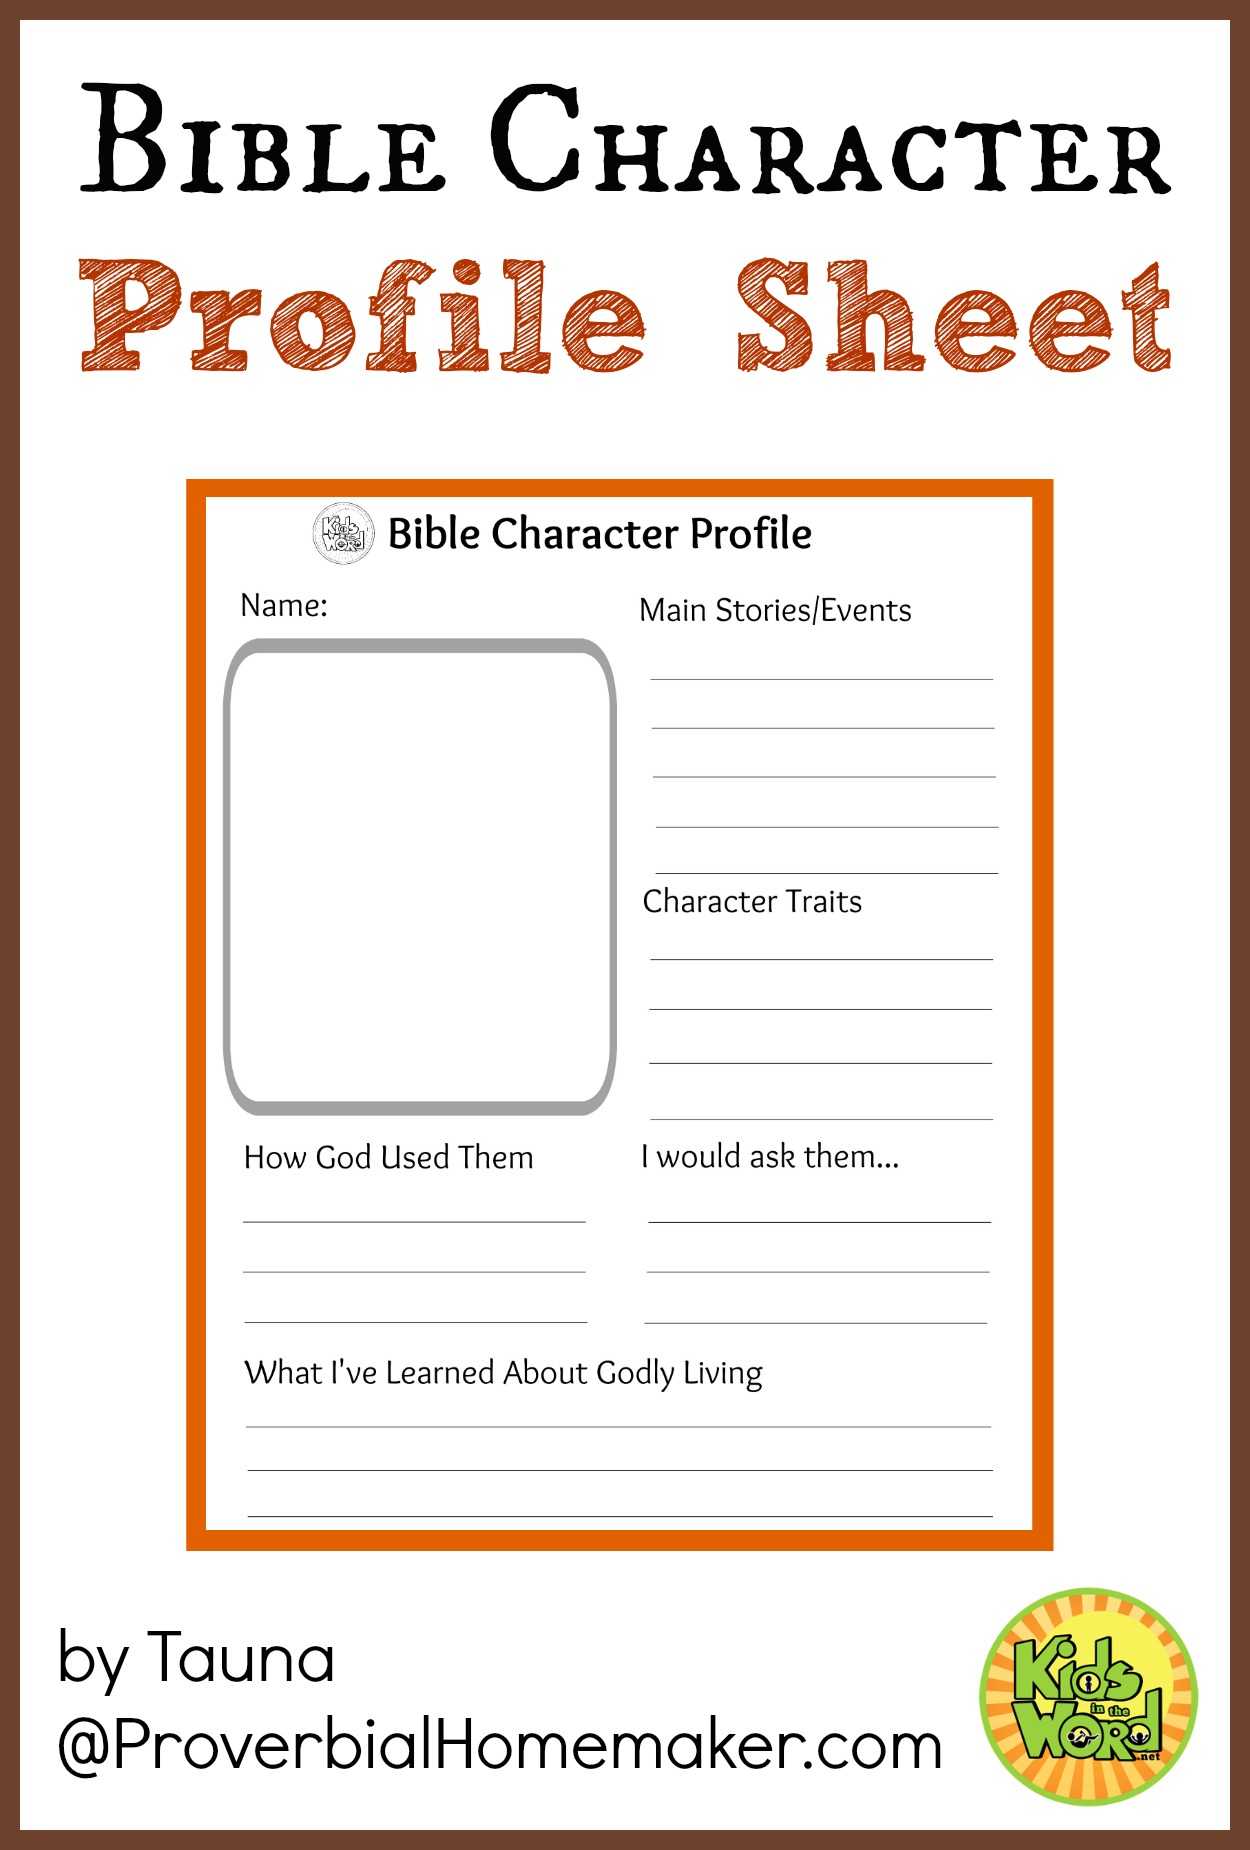 Free Printable Bible Study Worksheets Also Unbelievable Kids Bible Study Worksheets Character Profile Sheet